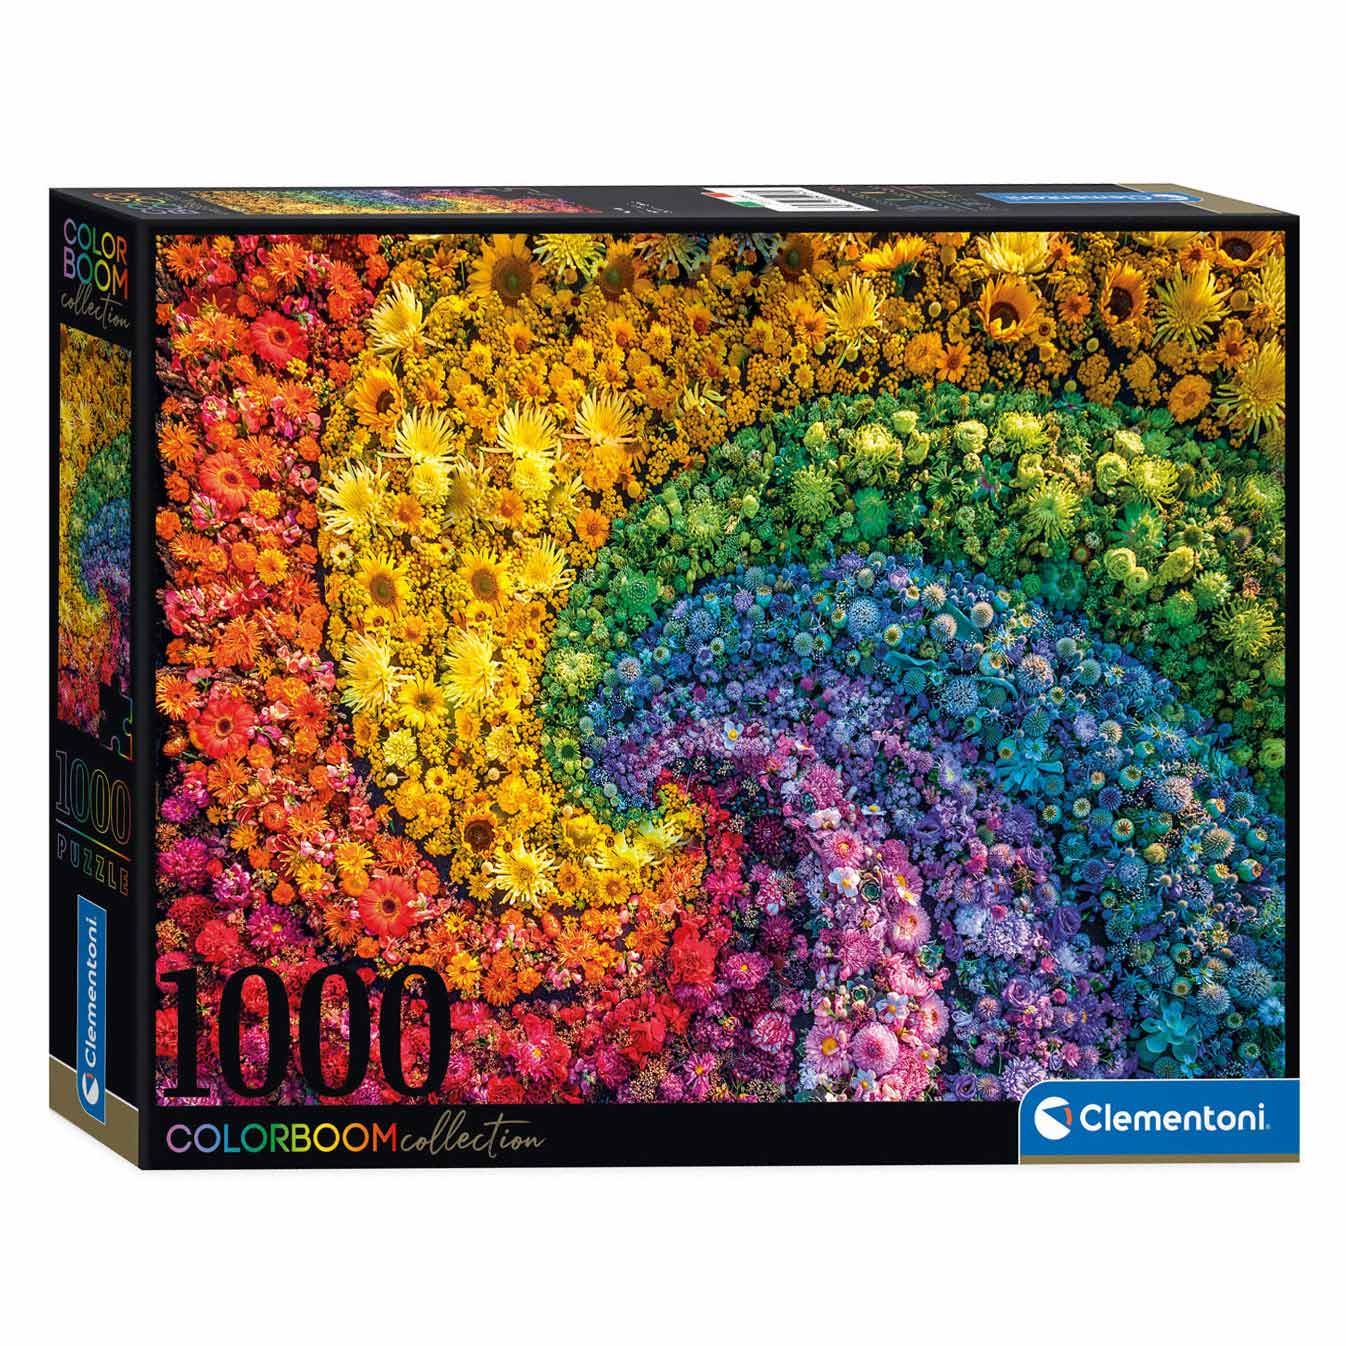 Clementoni Colorboom Puzzel Whirl